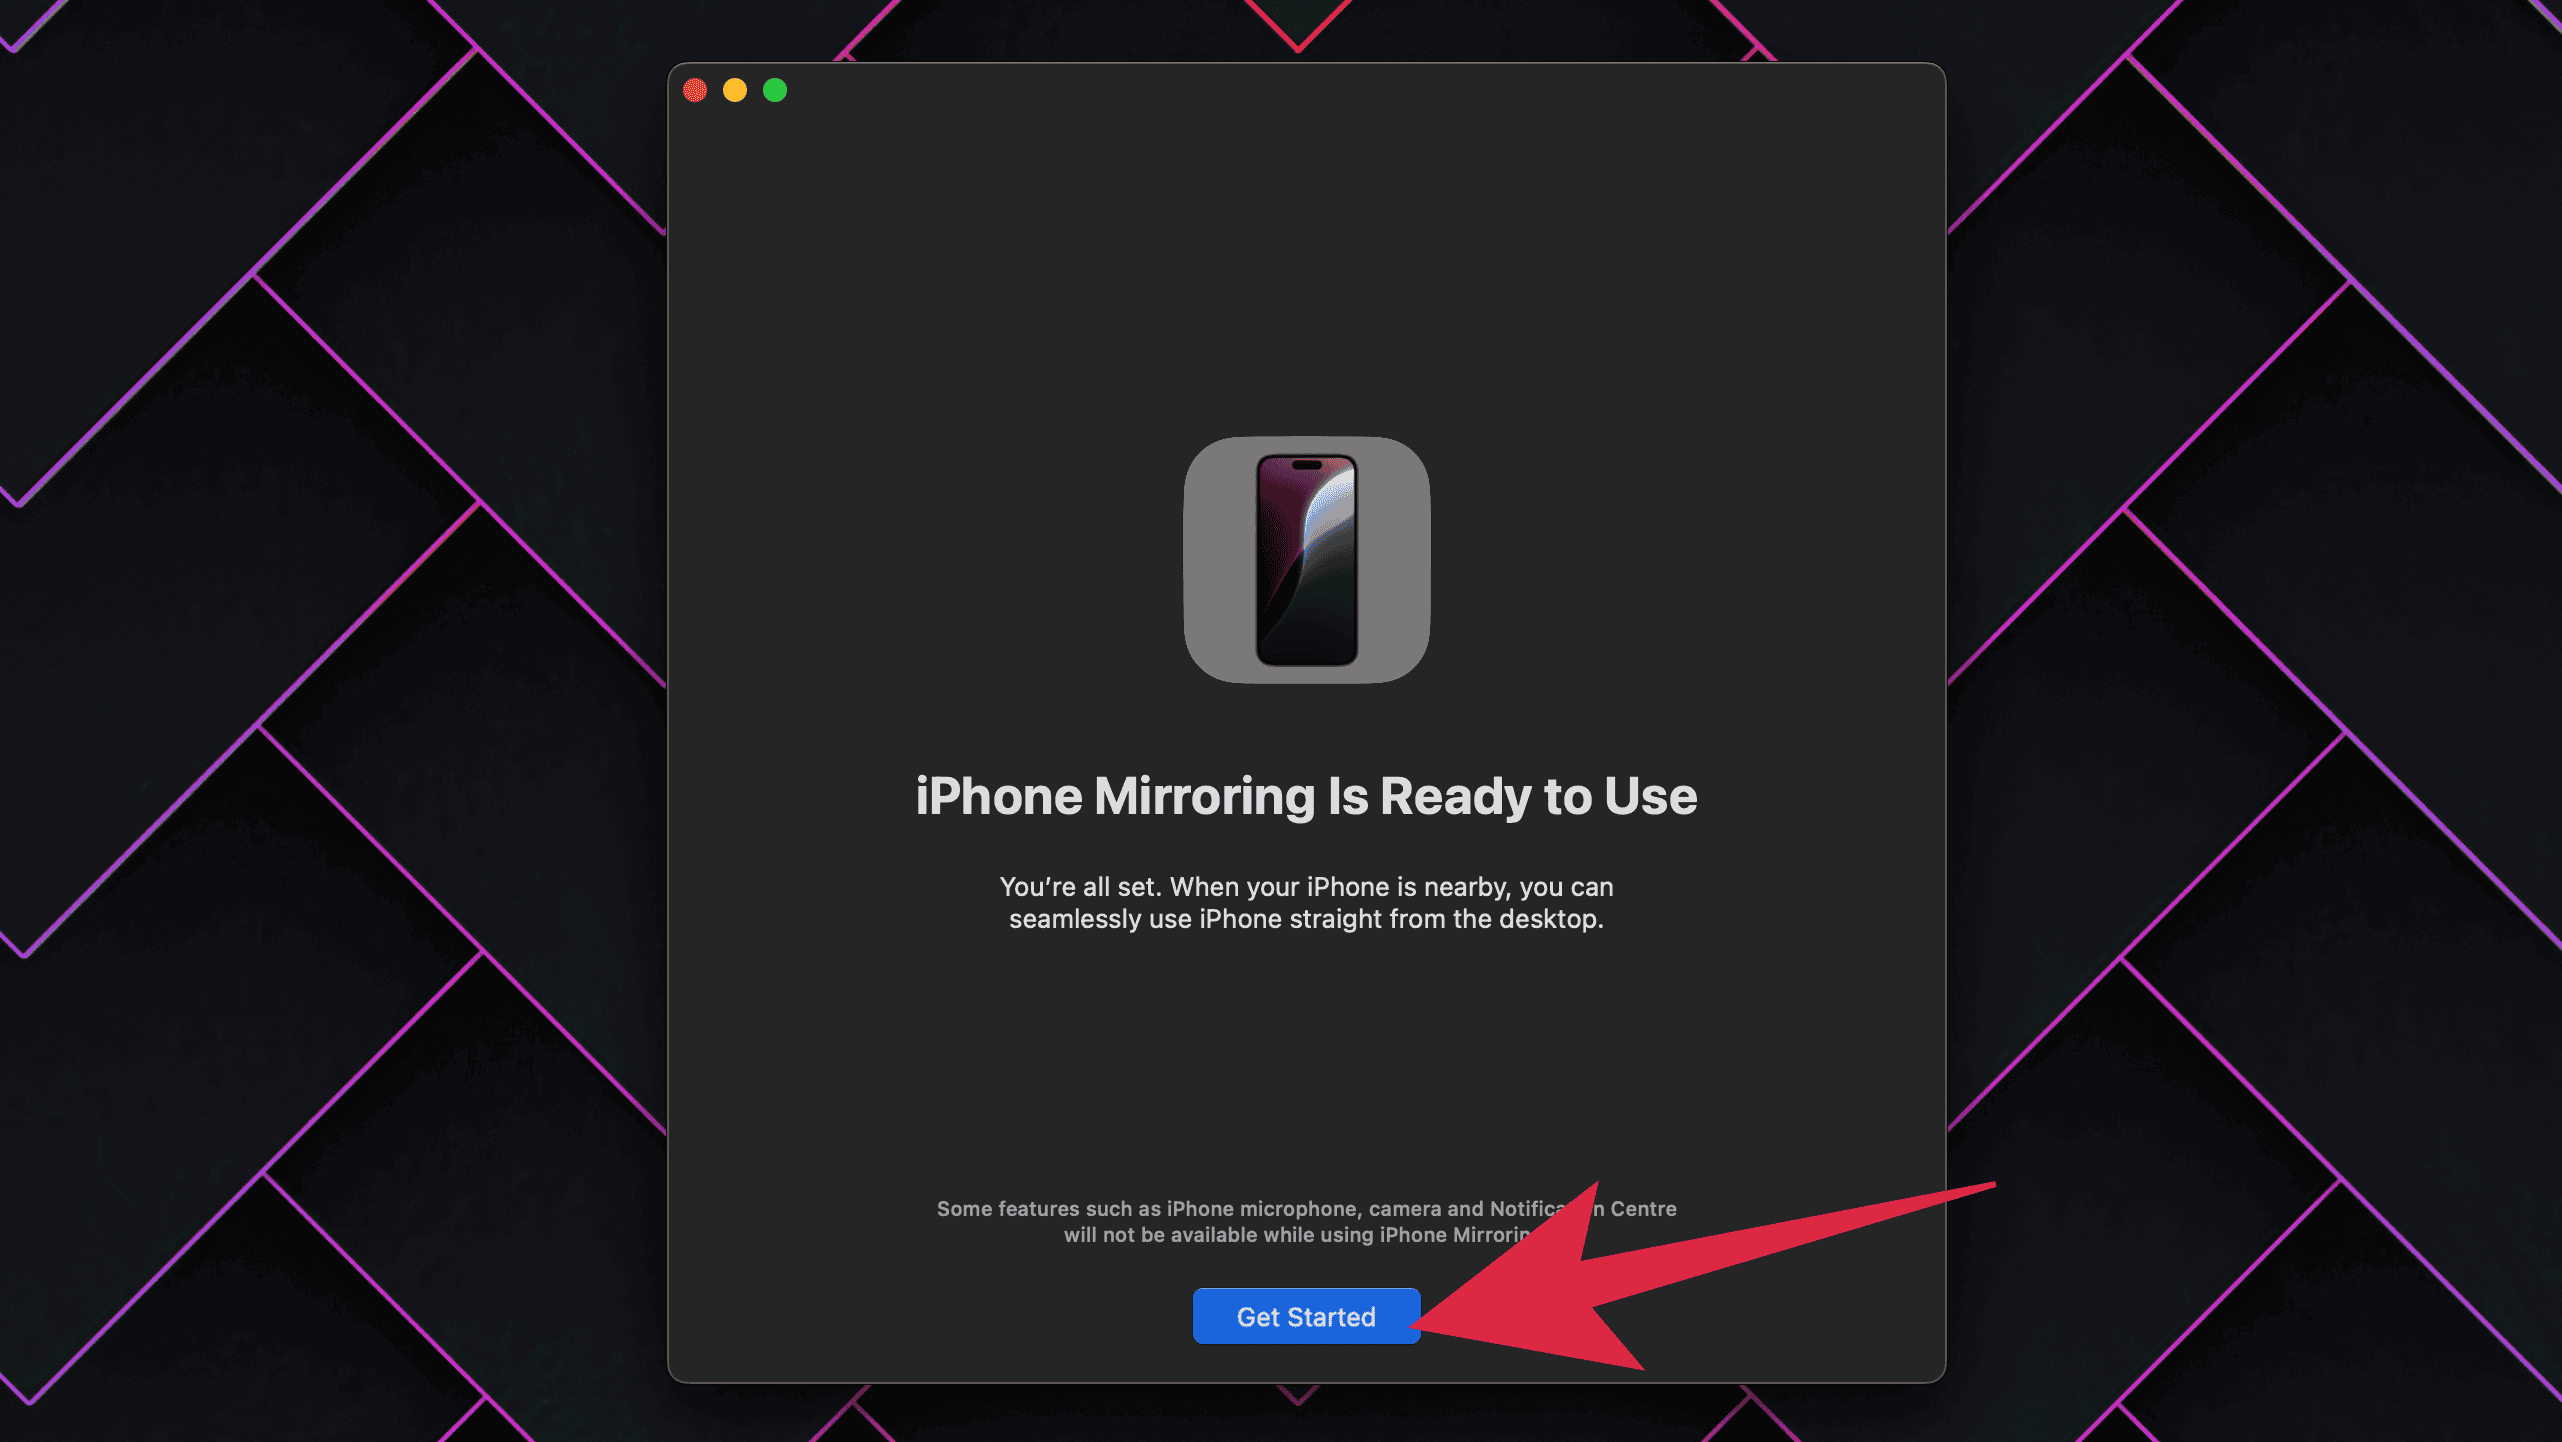 4. After you've unlocked your iPhone, the app will begin pairing your Mac to your iPhone. Once done, click on Get Started